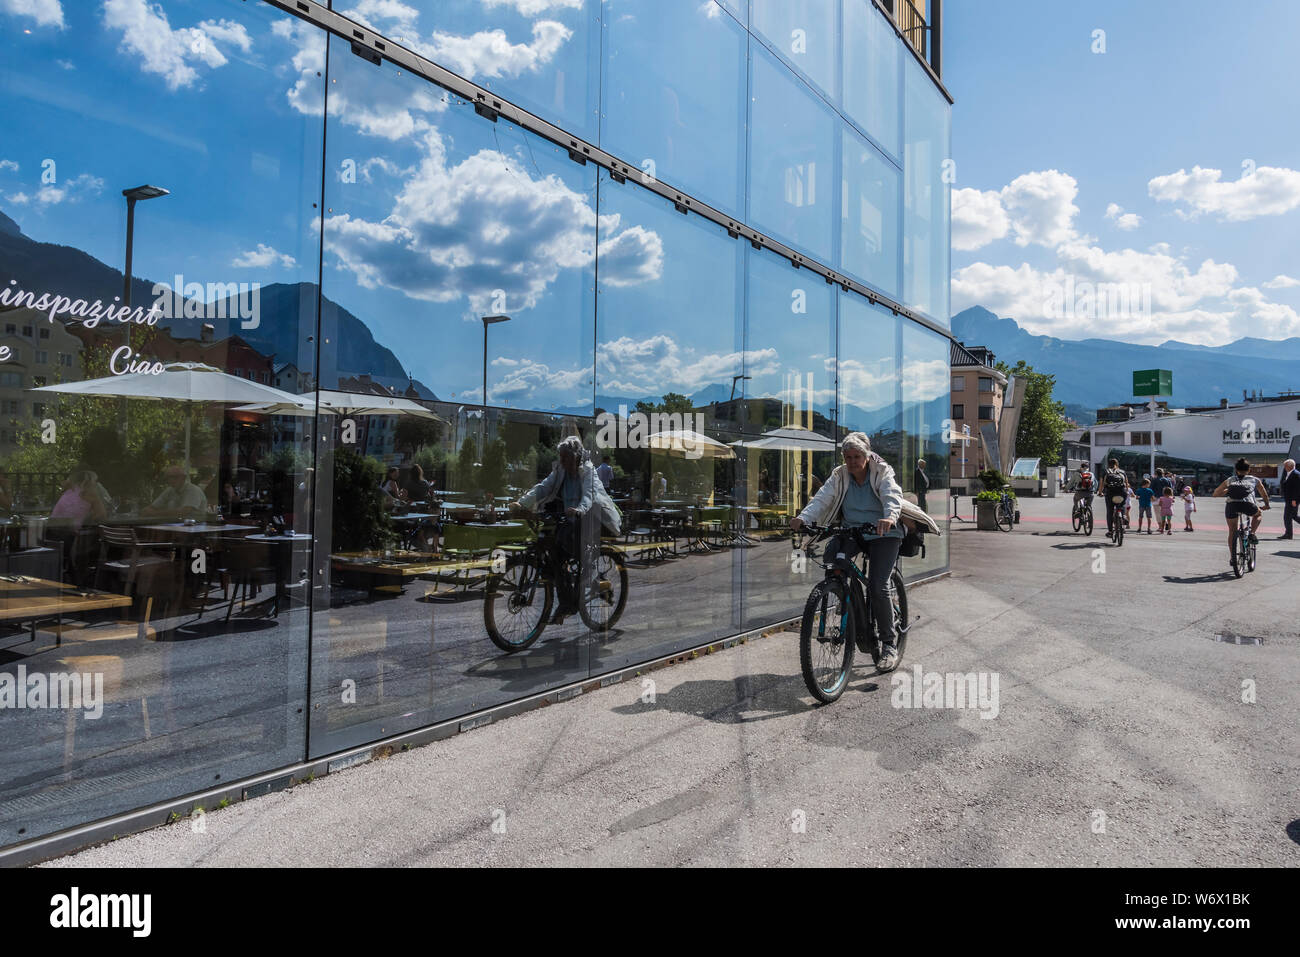 Window reflections of people enjoying themselves during a sunny summer day in the city Innsbruck provincial capitol city of the Tirol in Austria Stock Photo